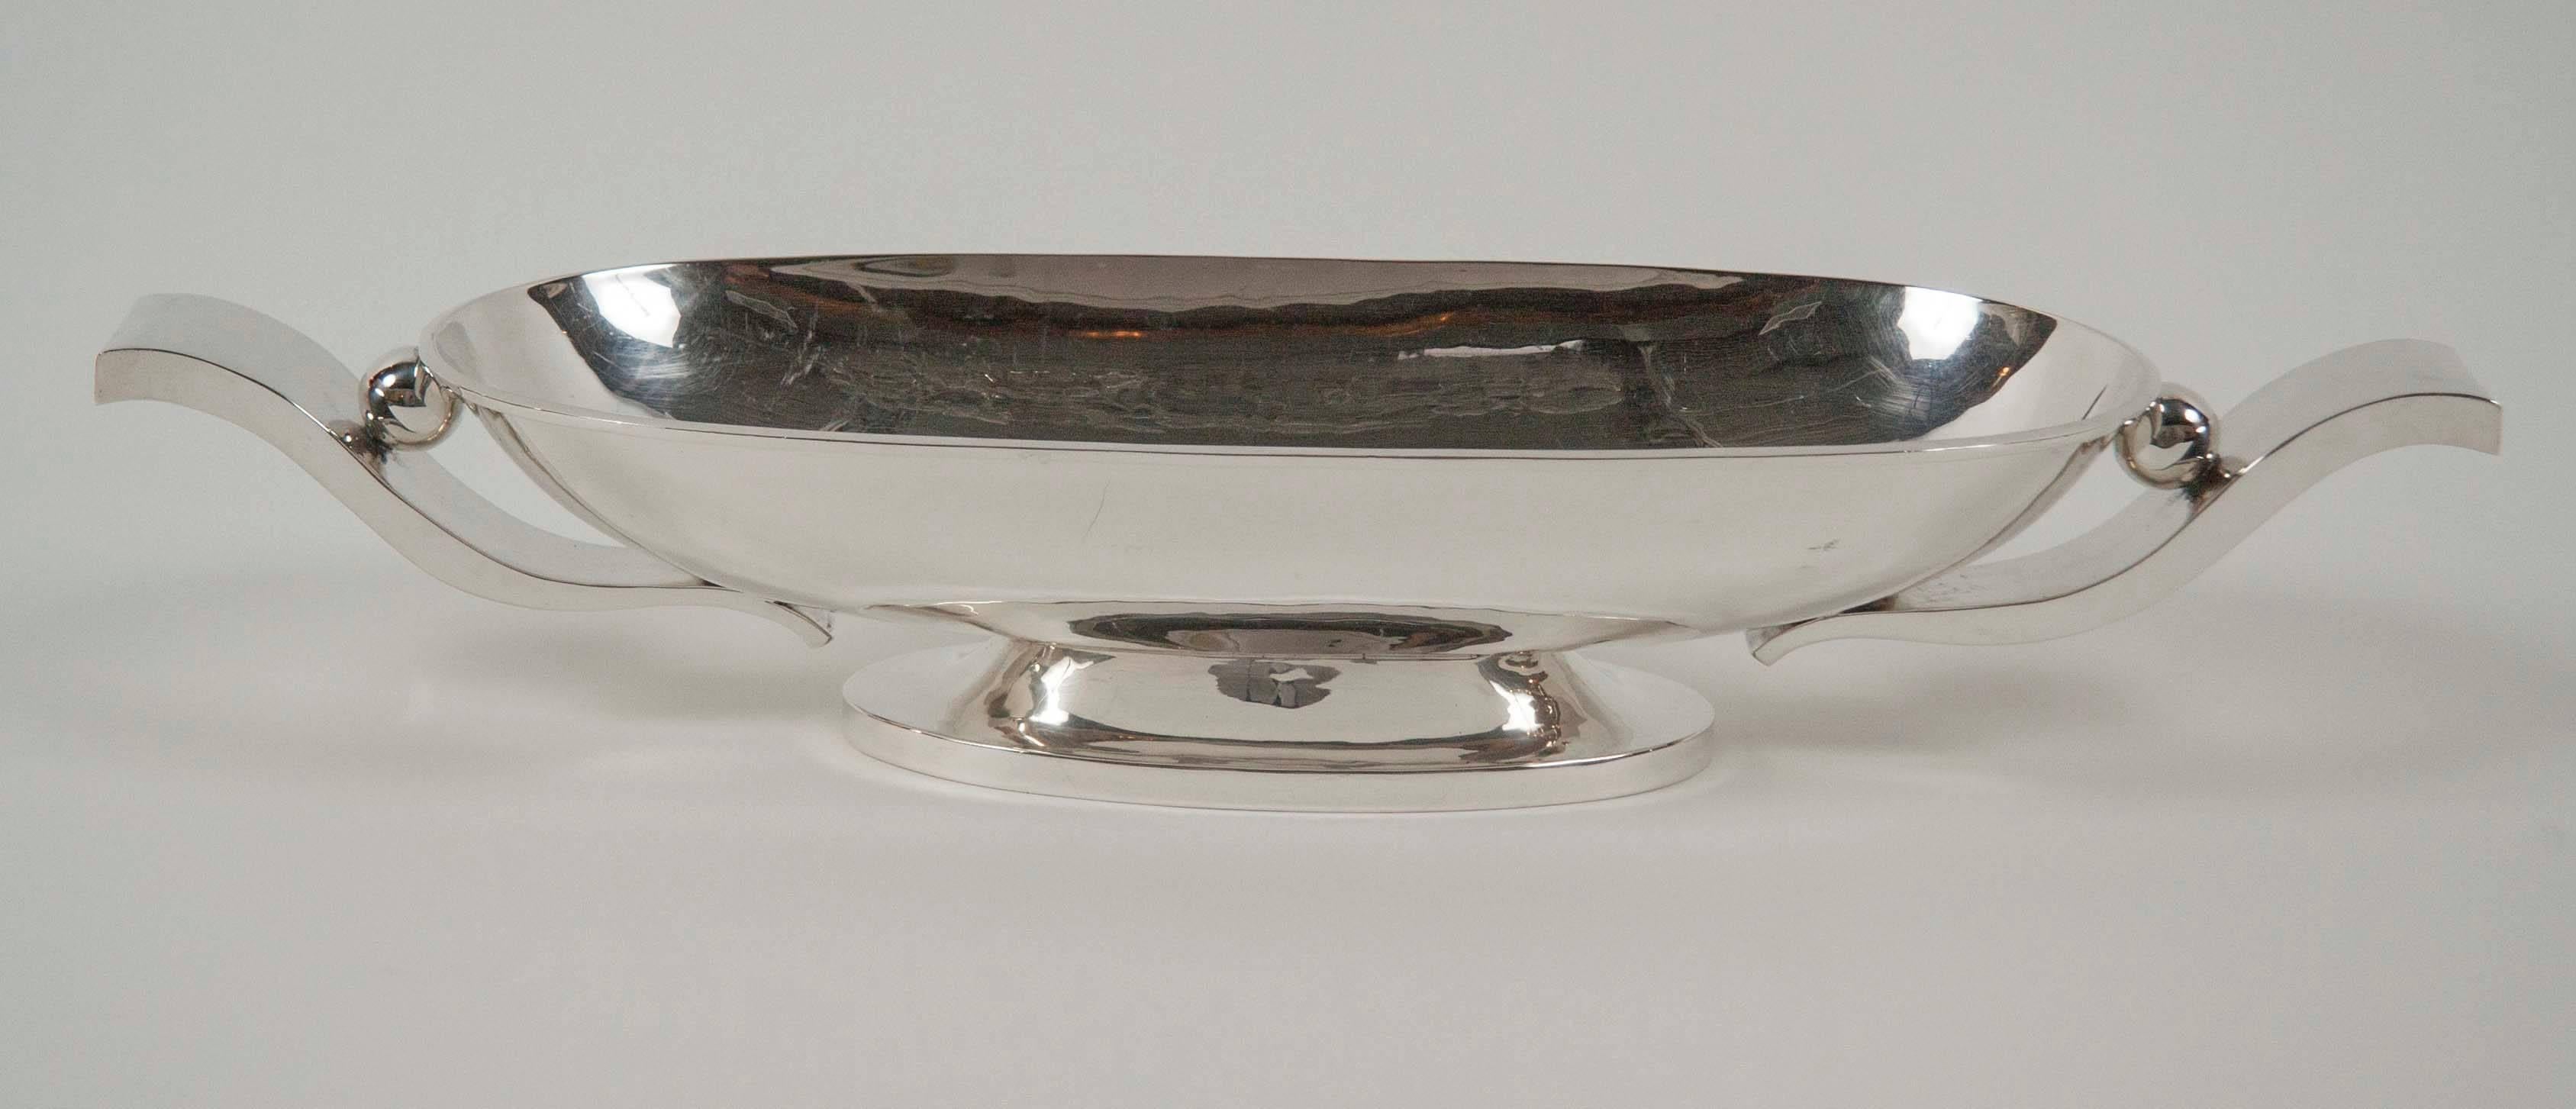 A handsome Art Deco style sterling silver centre bowl of Modern oval form with two handles by Mexican silversmith Tango Aceves. Taxco, Mexico.